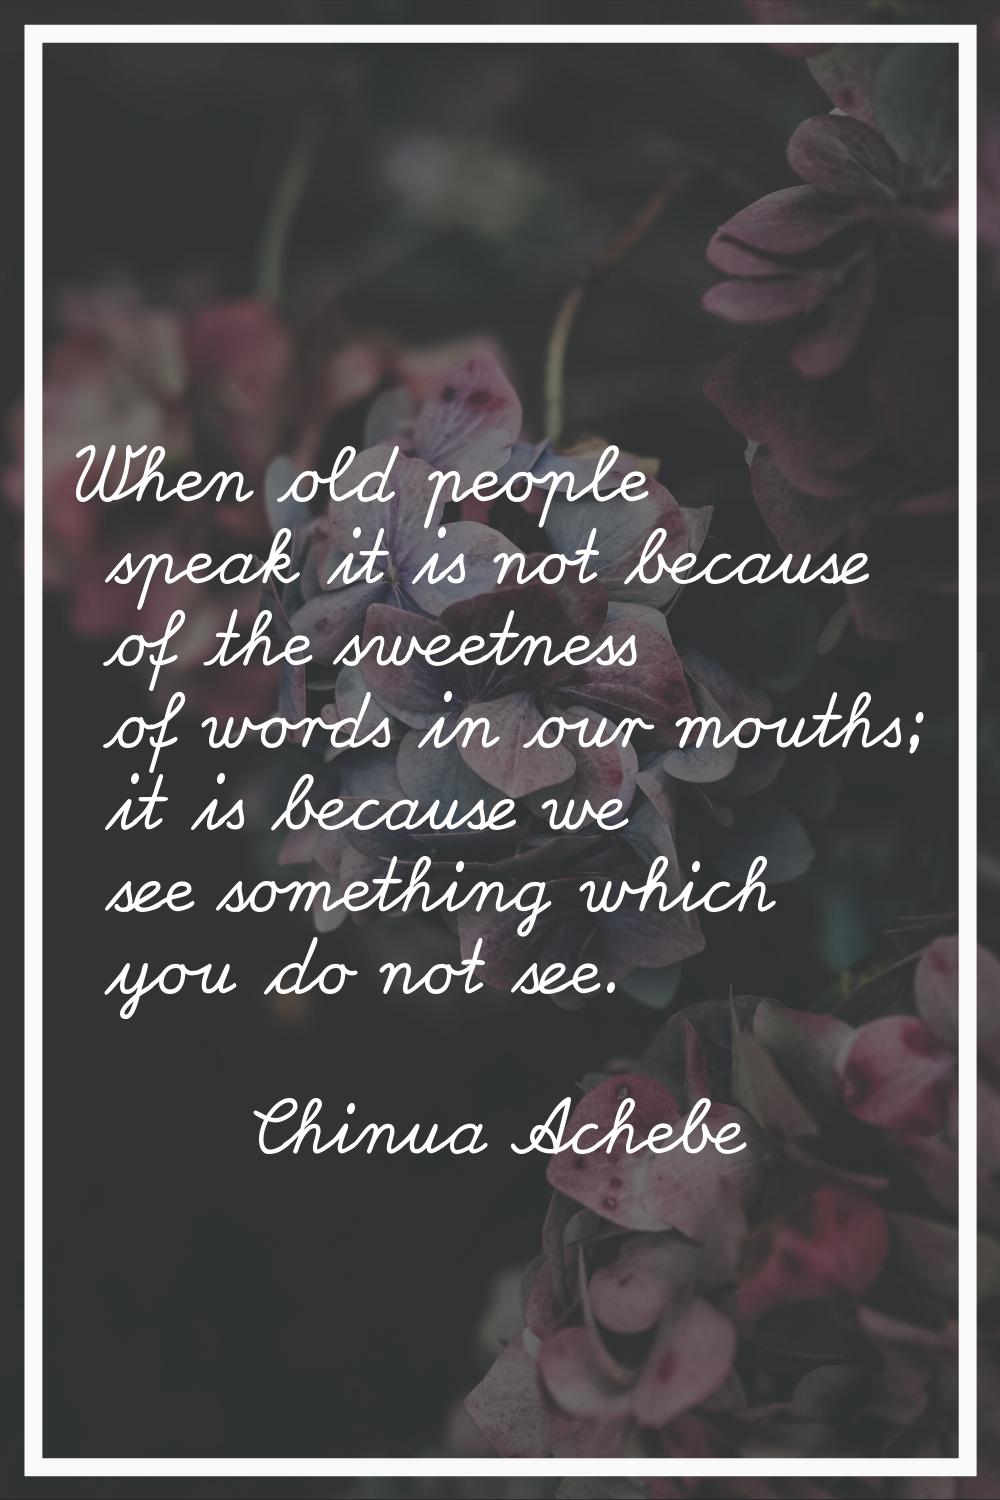 When old people speak it is not because of the sweetness of words in our mouths; it is because we s